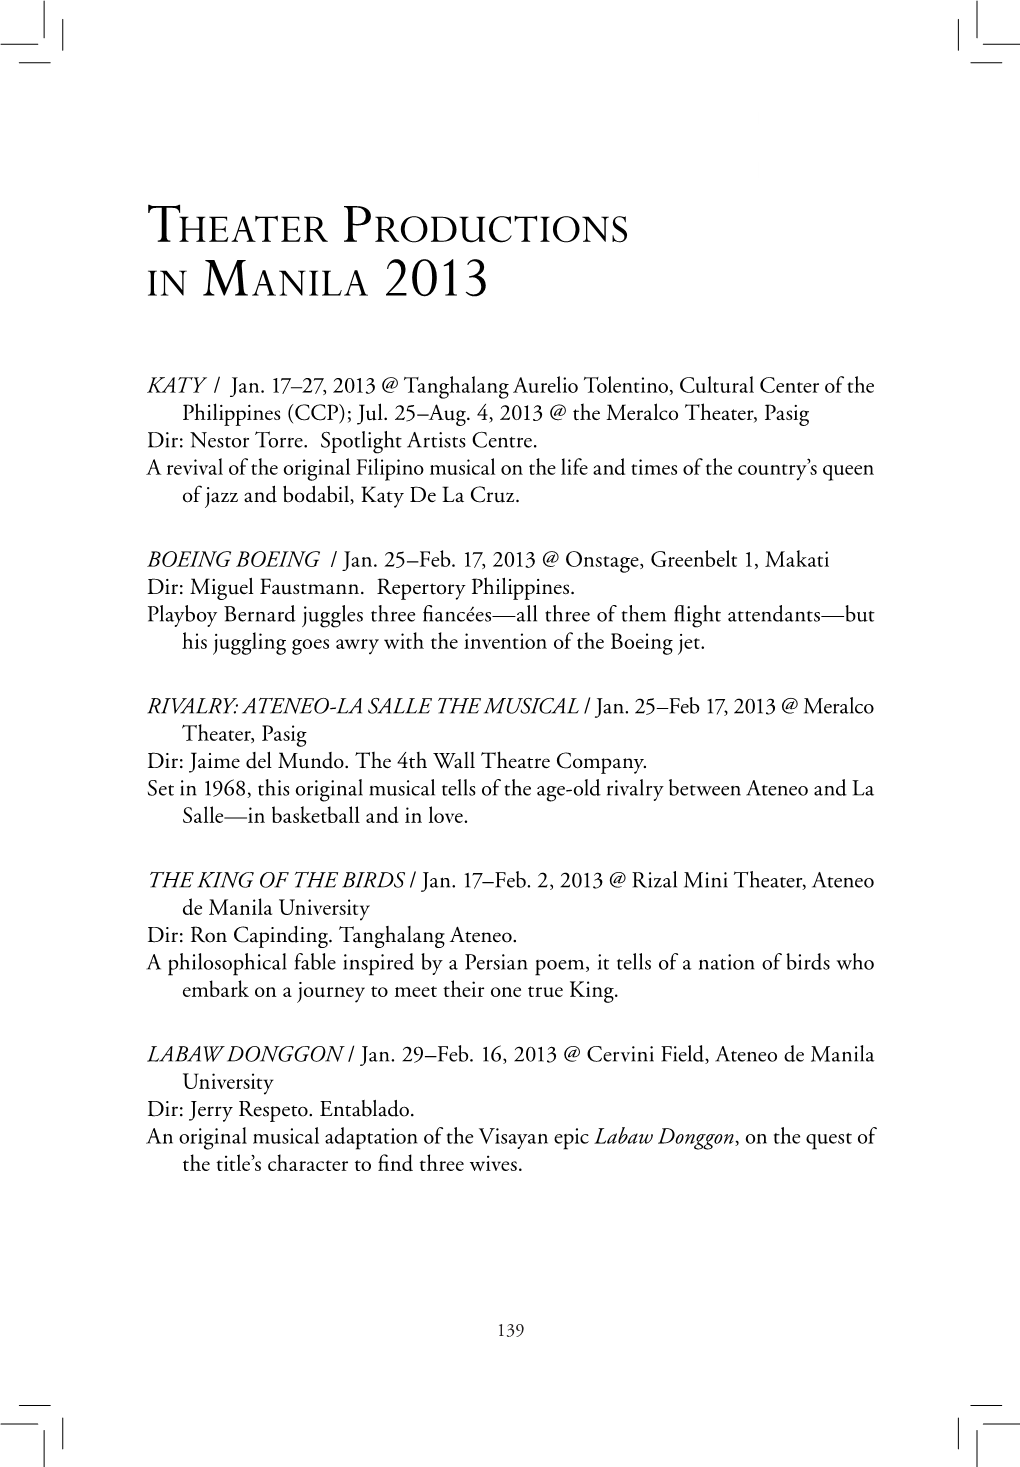 Theater Productions in Manila 2013